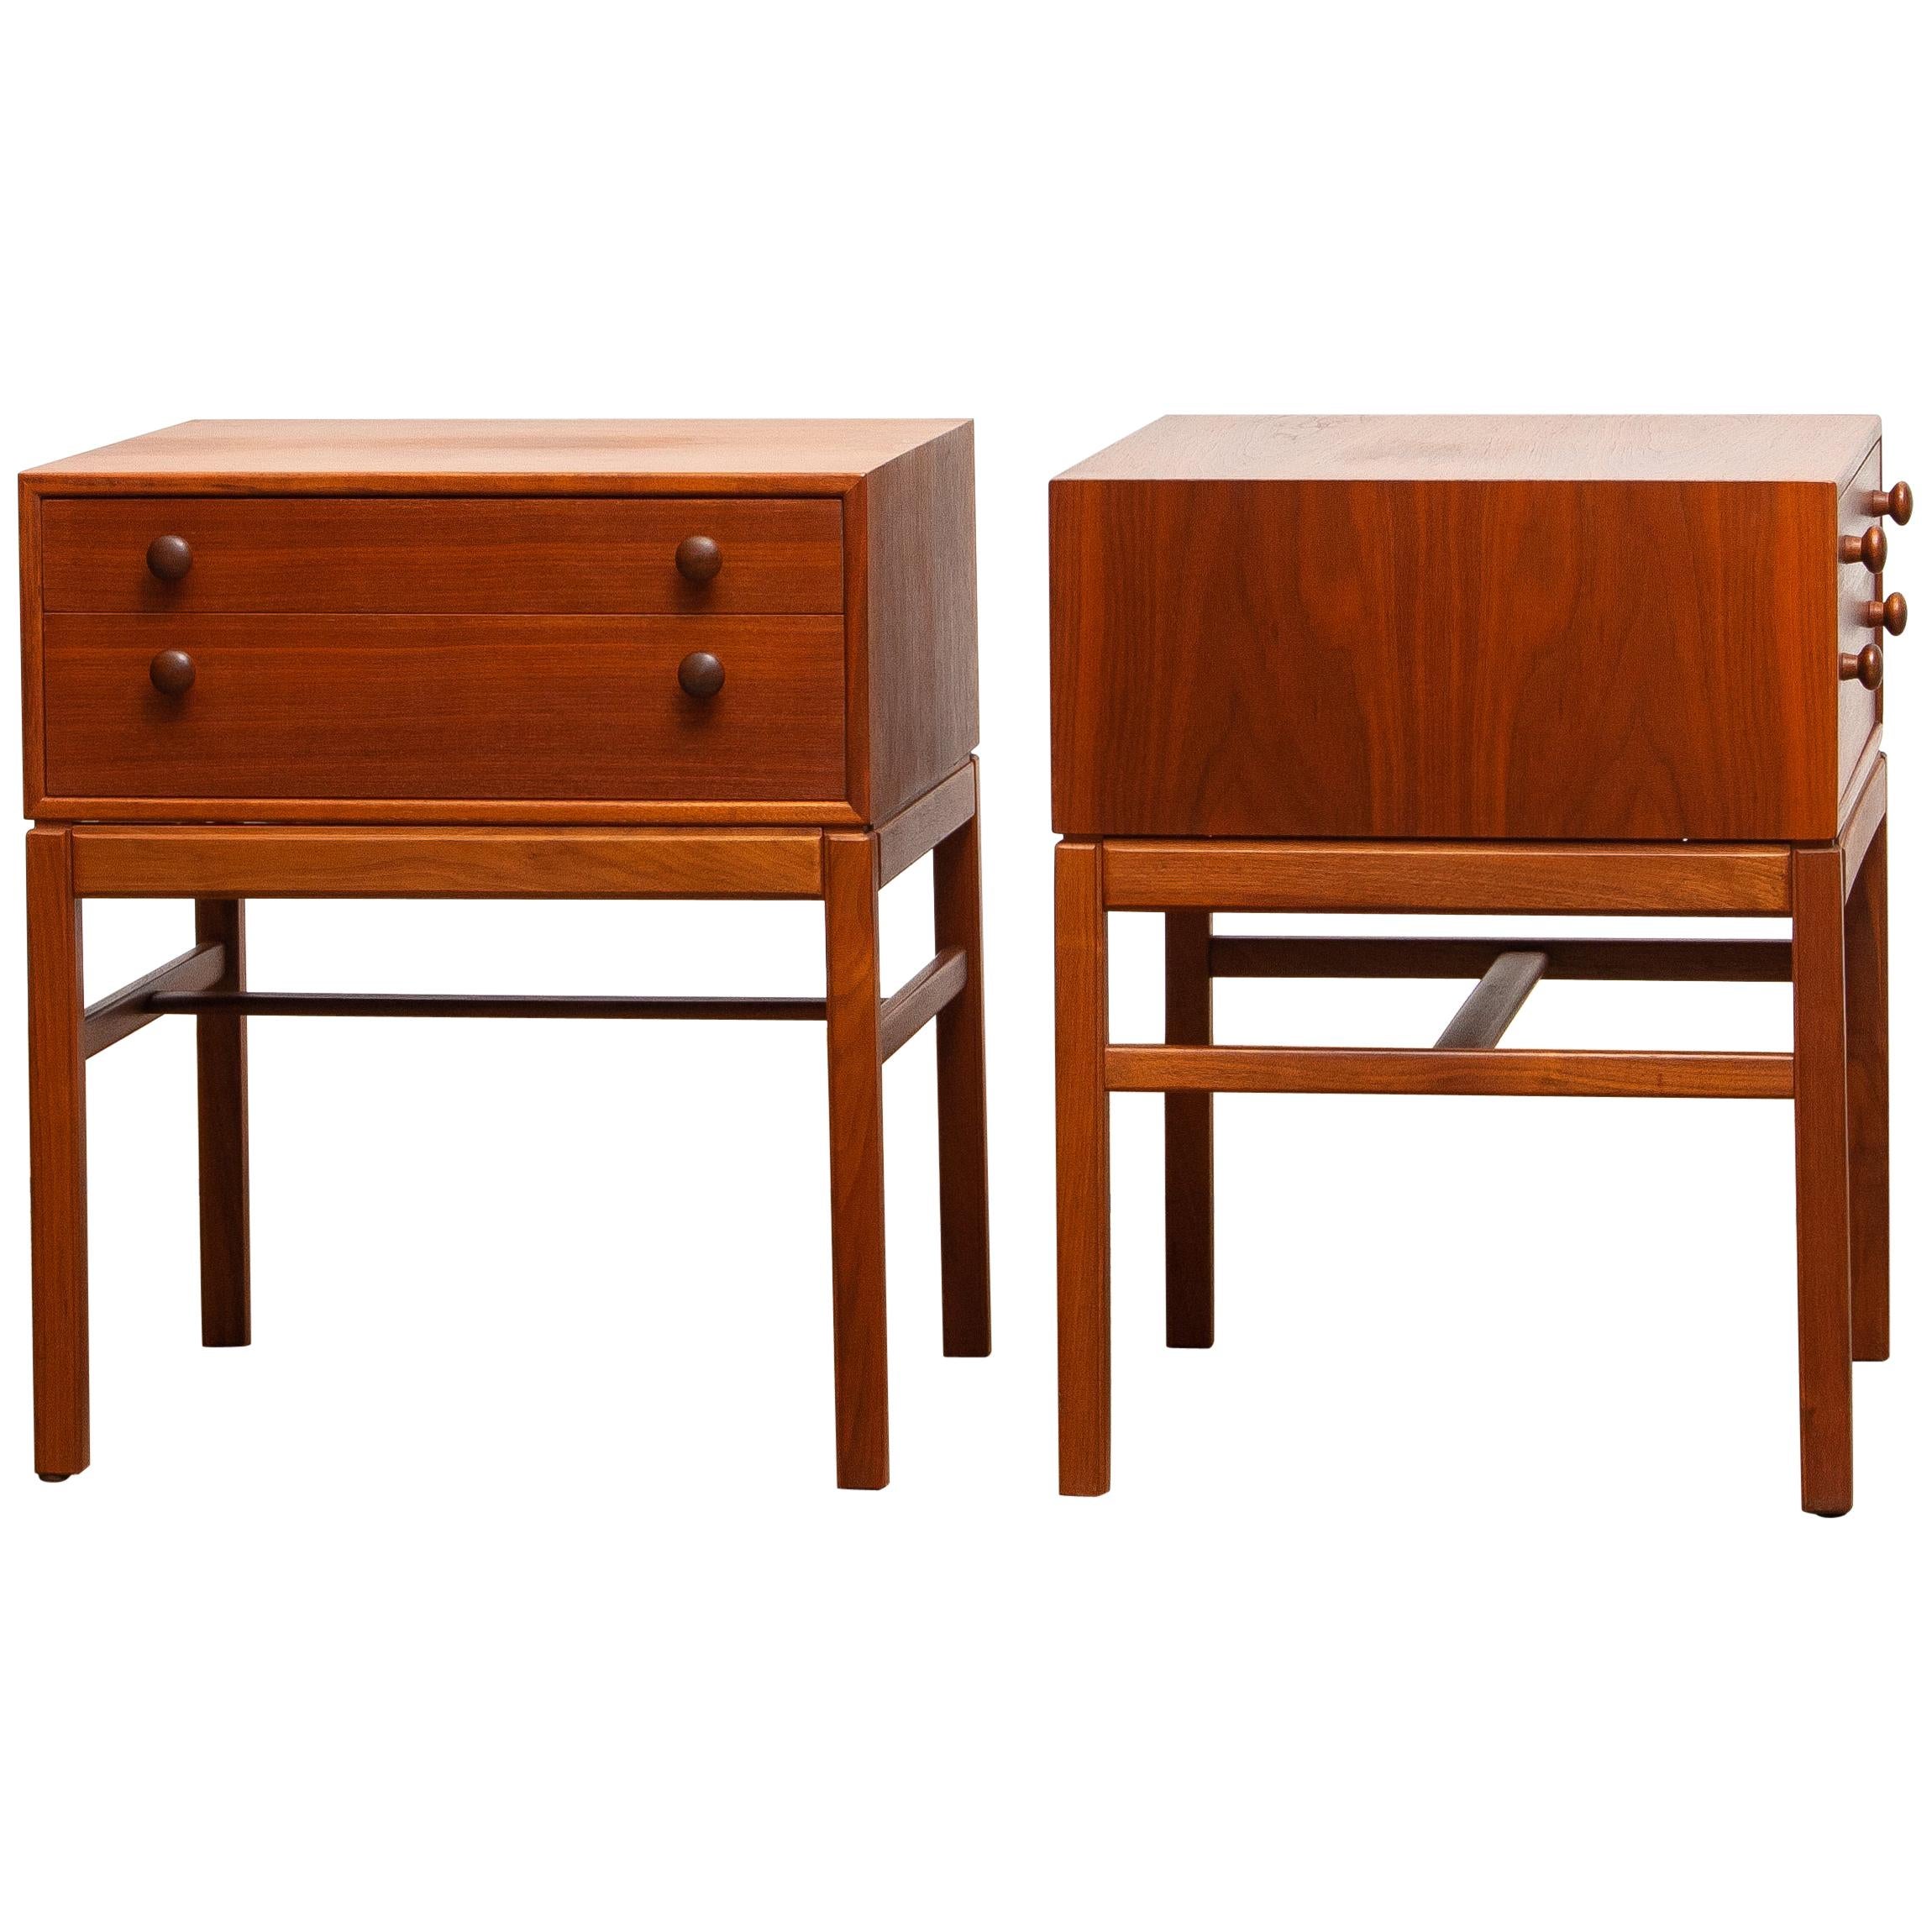 Beautiful set of two teak nightstands, side tables designed by Sven Engström & Gunnar Myrstrand for Tingström Möbelfabriks, Sweden.
They are from the flexible 'Casino' collection.
You can lift the top with the two drawers from the stand.
They are